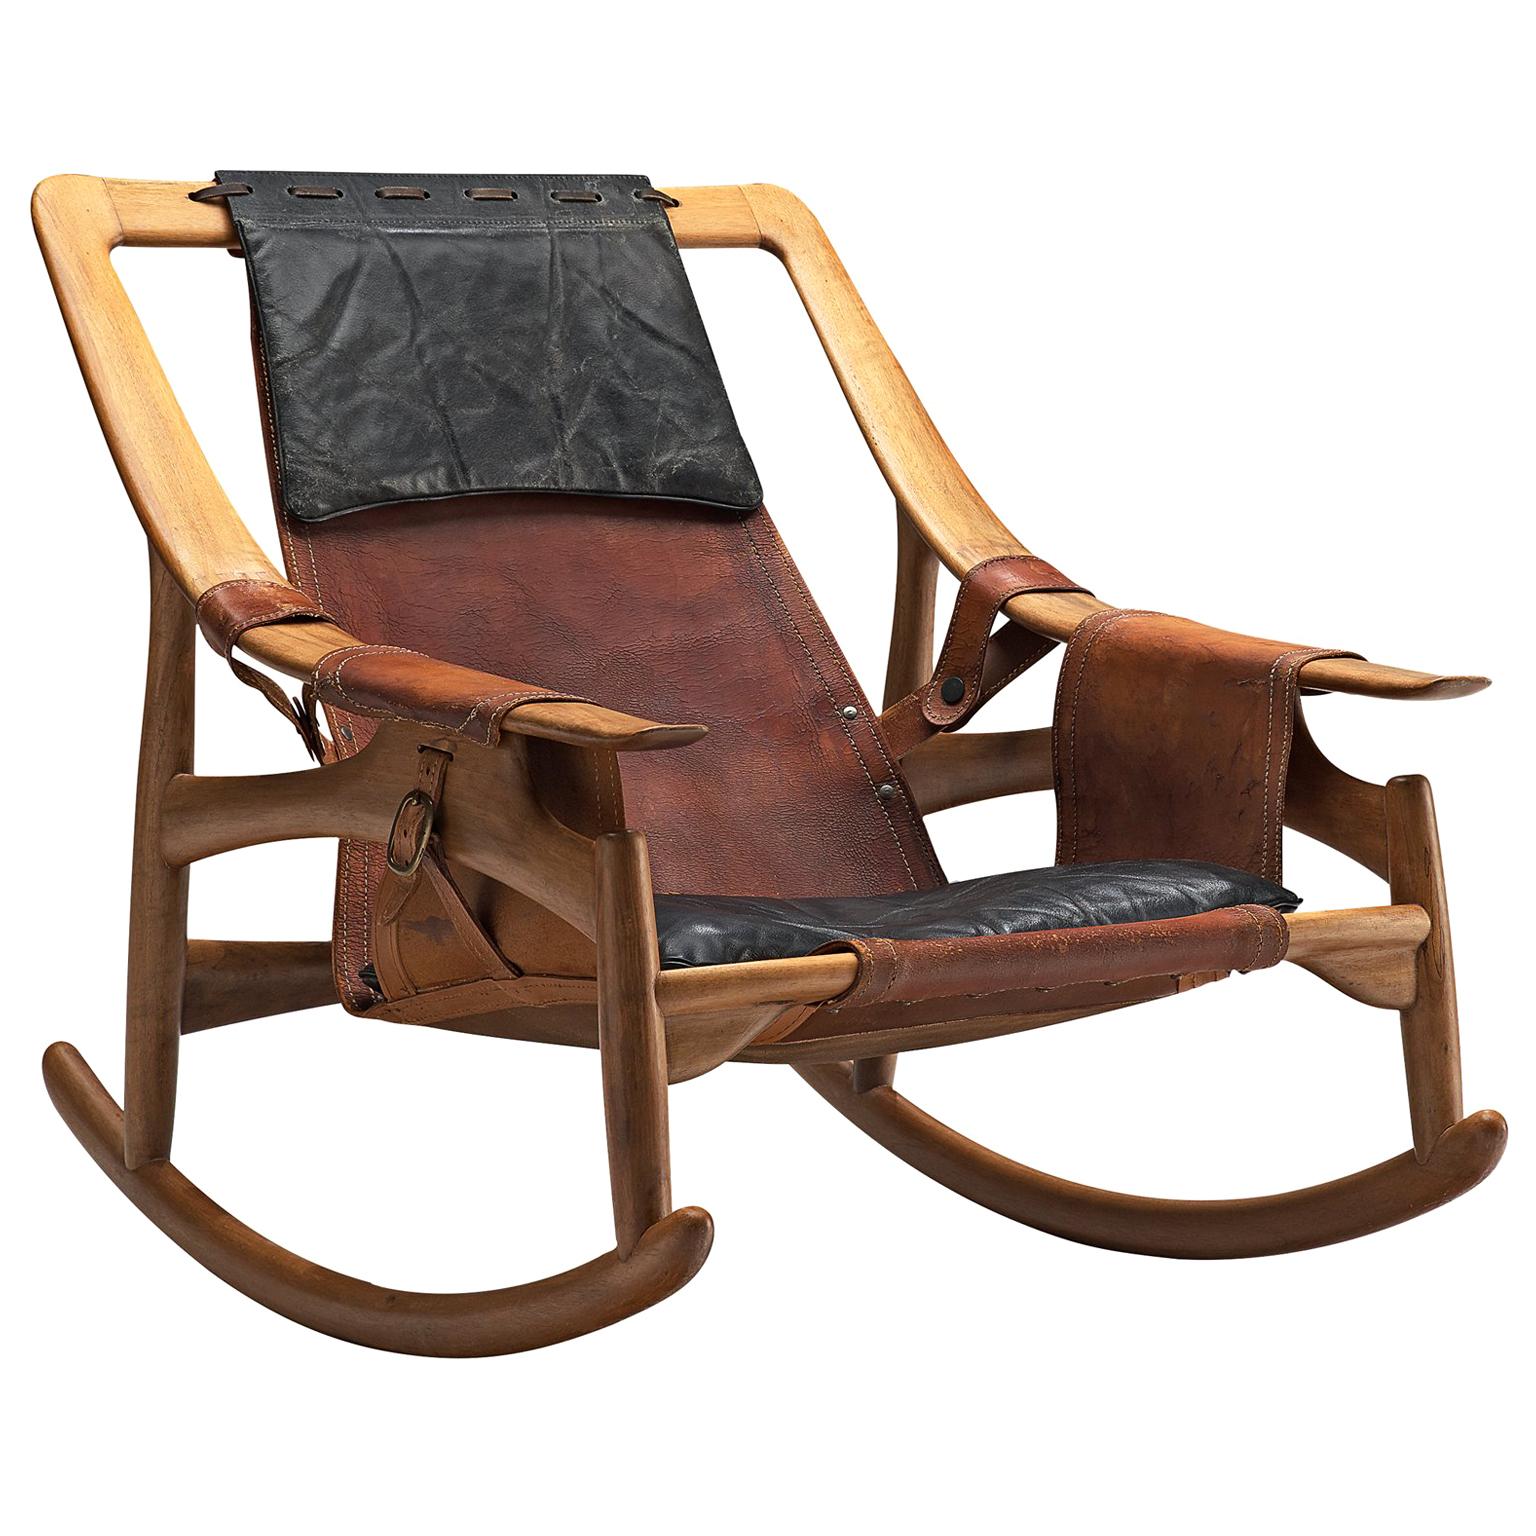 W. Andersag Rocking Chair in Teak and Original Leather